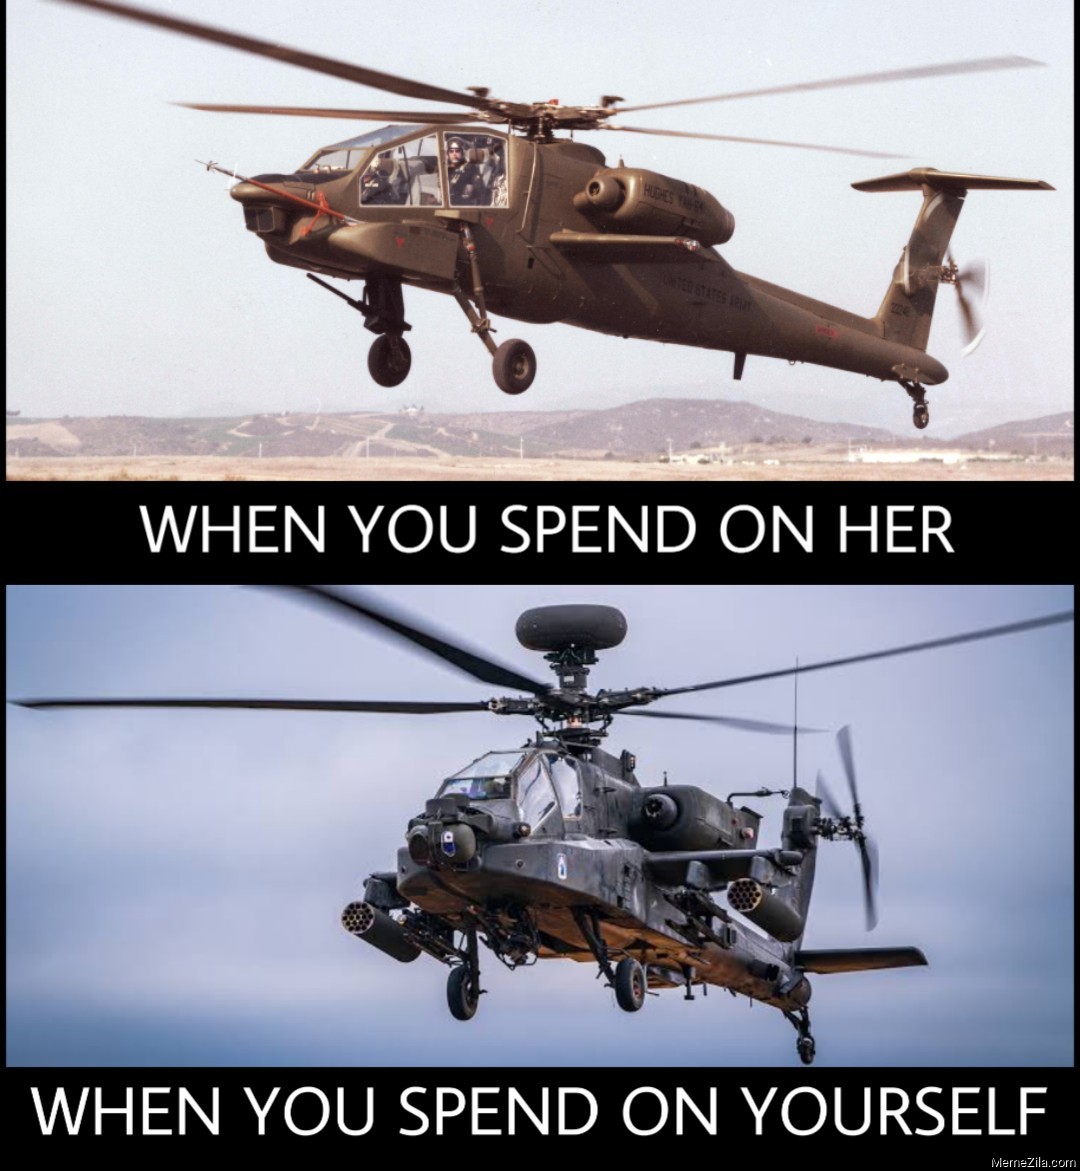 When-you-spend-on-her-vs-When-you-spend-on-yourself-Helicopter-meme-7115.jpg